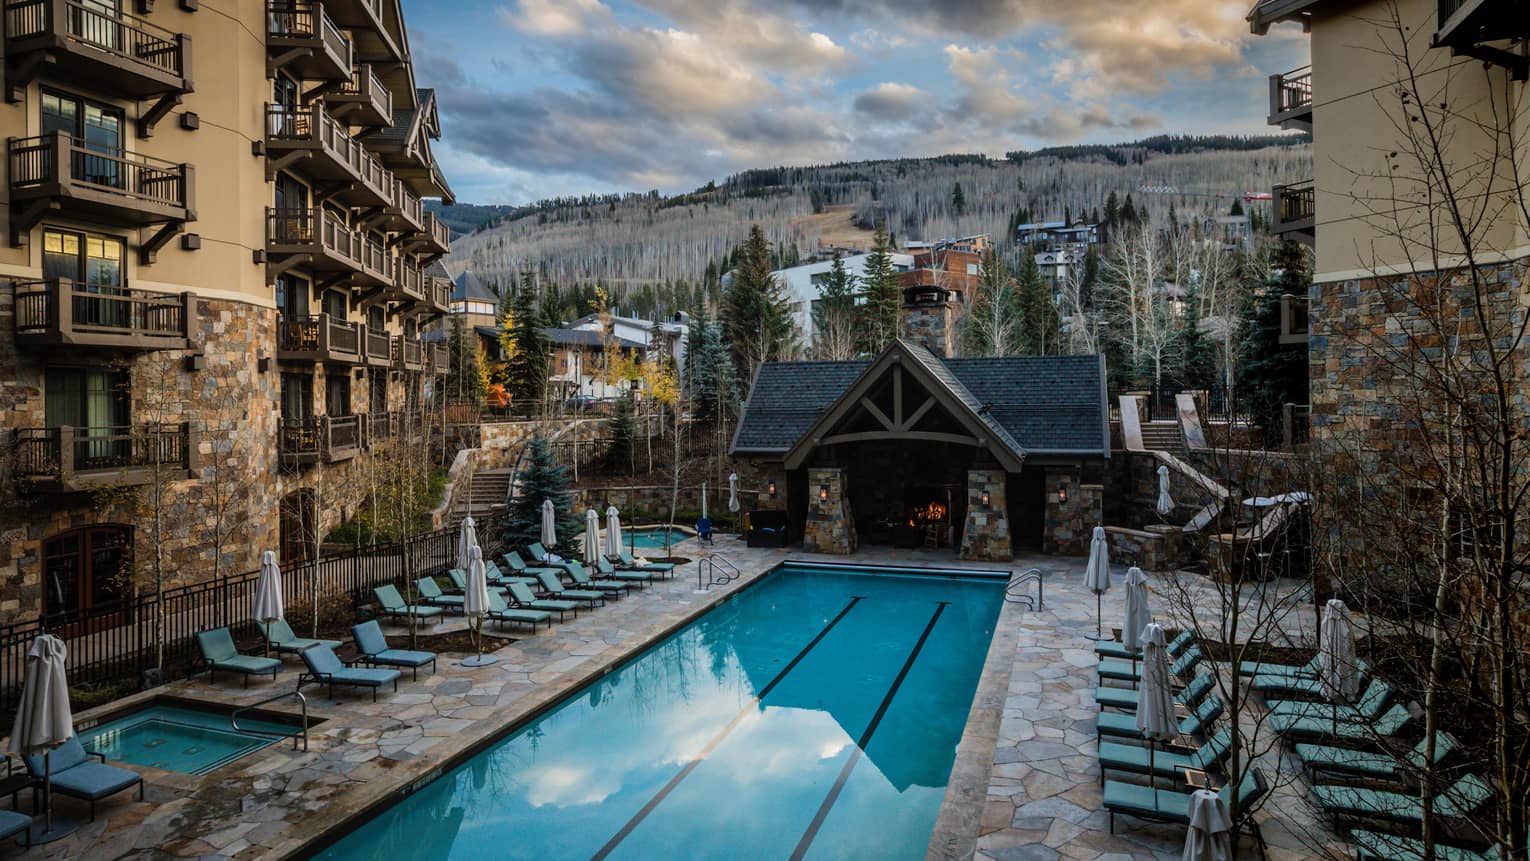 Blue lounge chairs face rectangle heated pool, surrounded by hotel building and mountain views